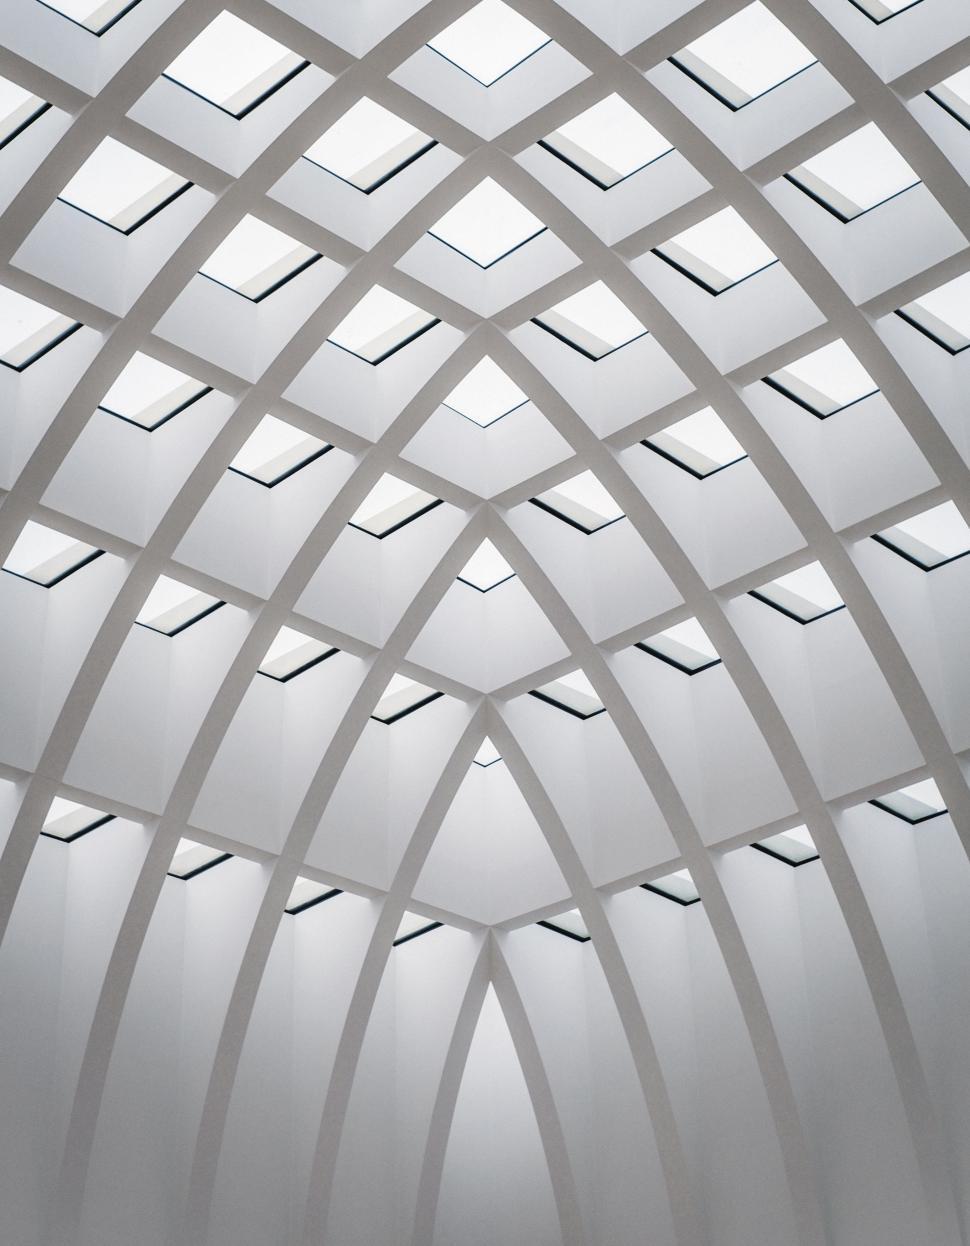 Free Image of Windows on Ceiling  